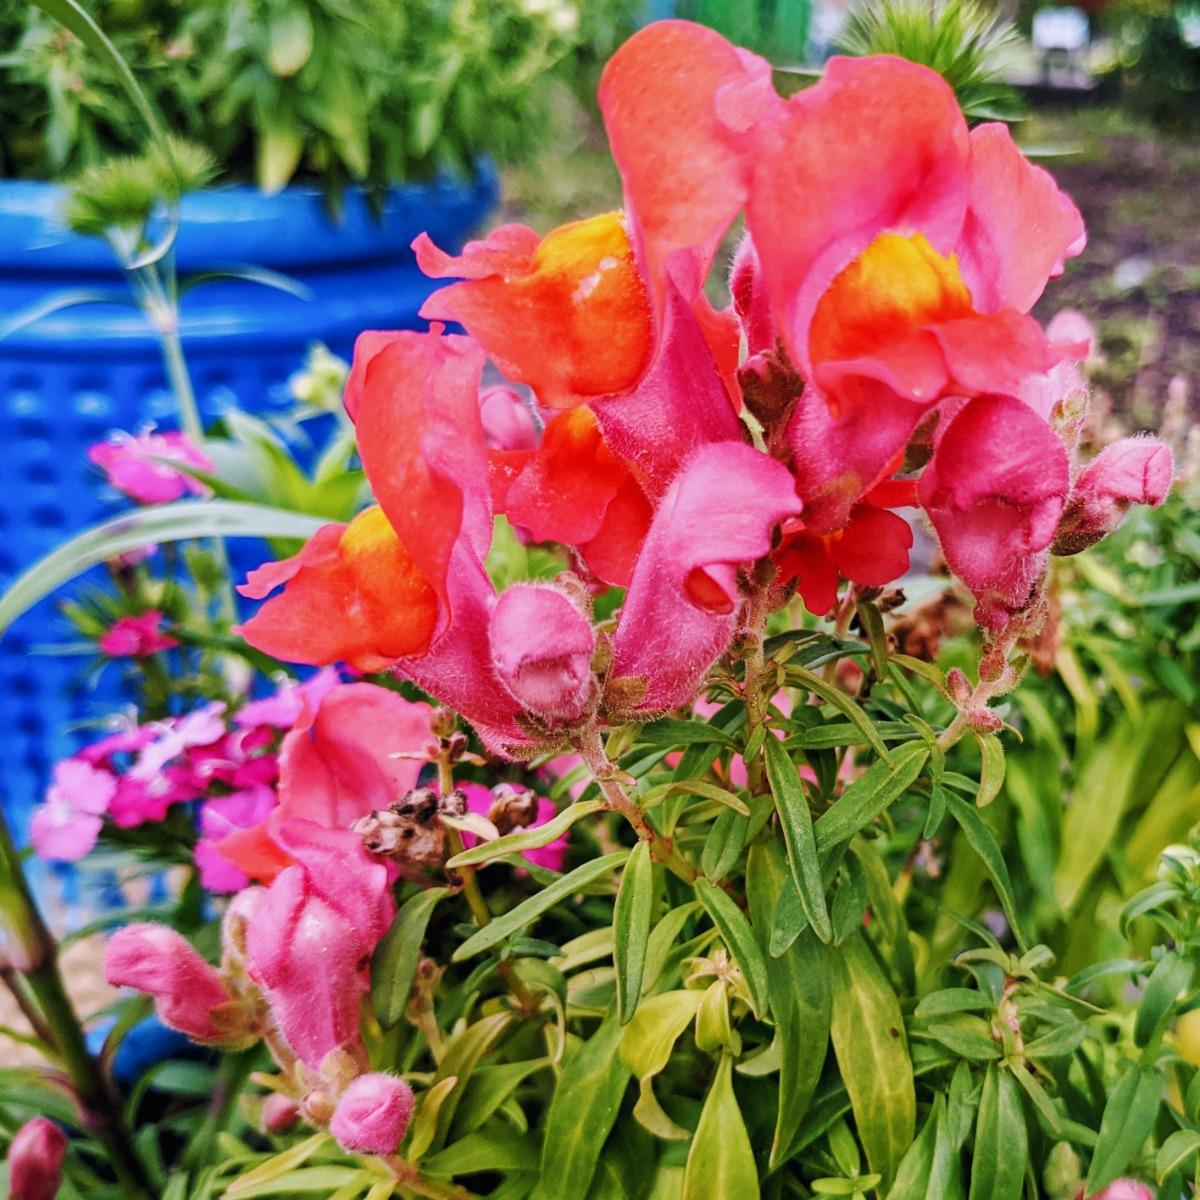 How to Deadhead Snapdragons – 5 Simple Steps